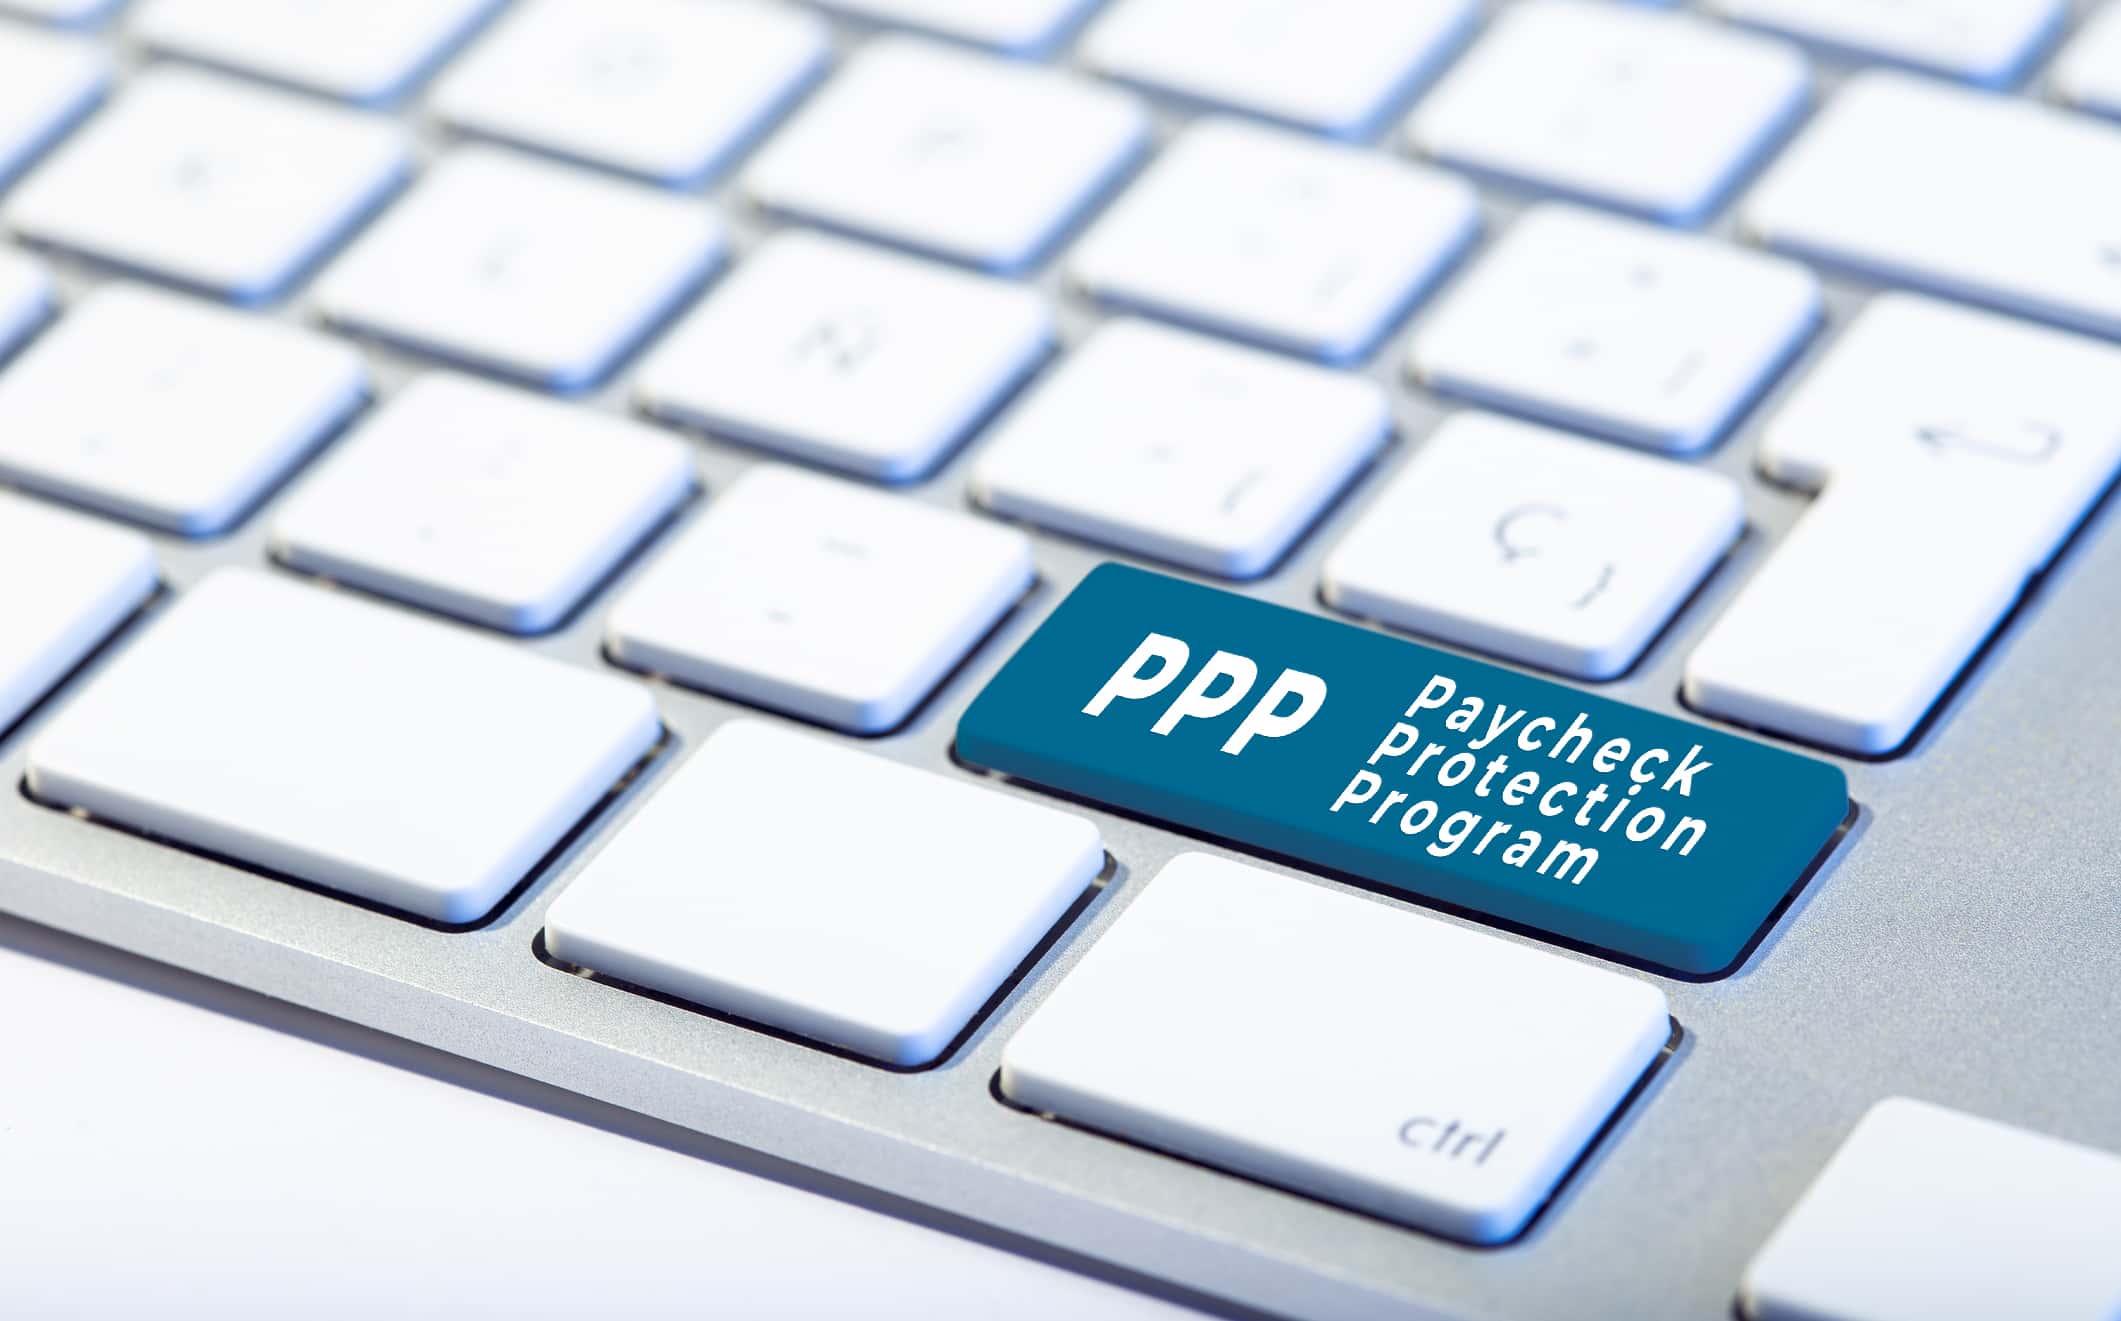 ppp-paycheck-protection-program-concept-inscription-on-keyboard